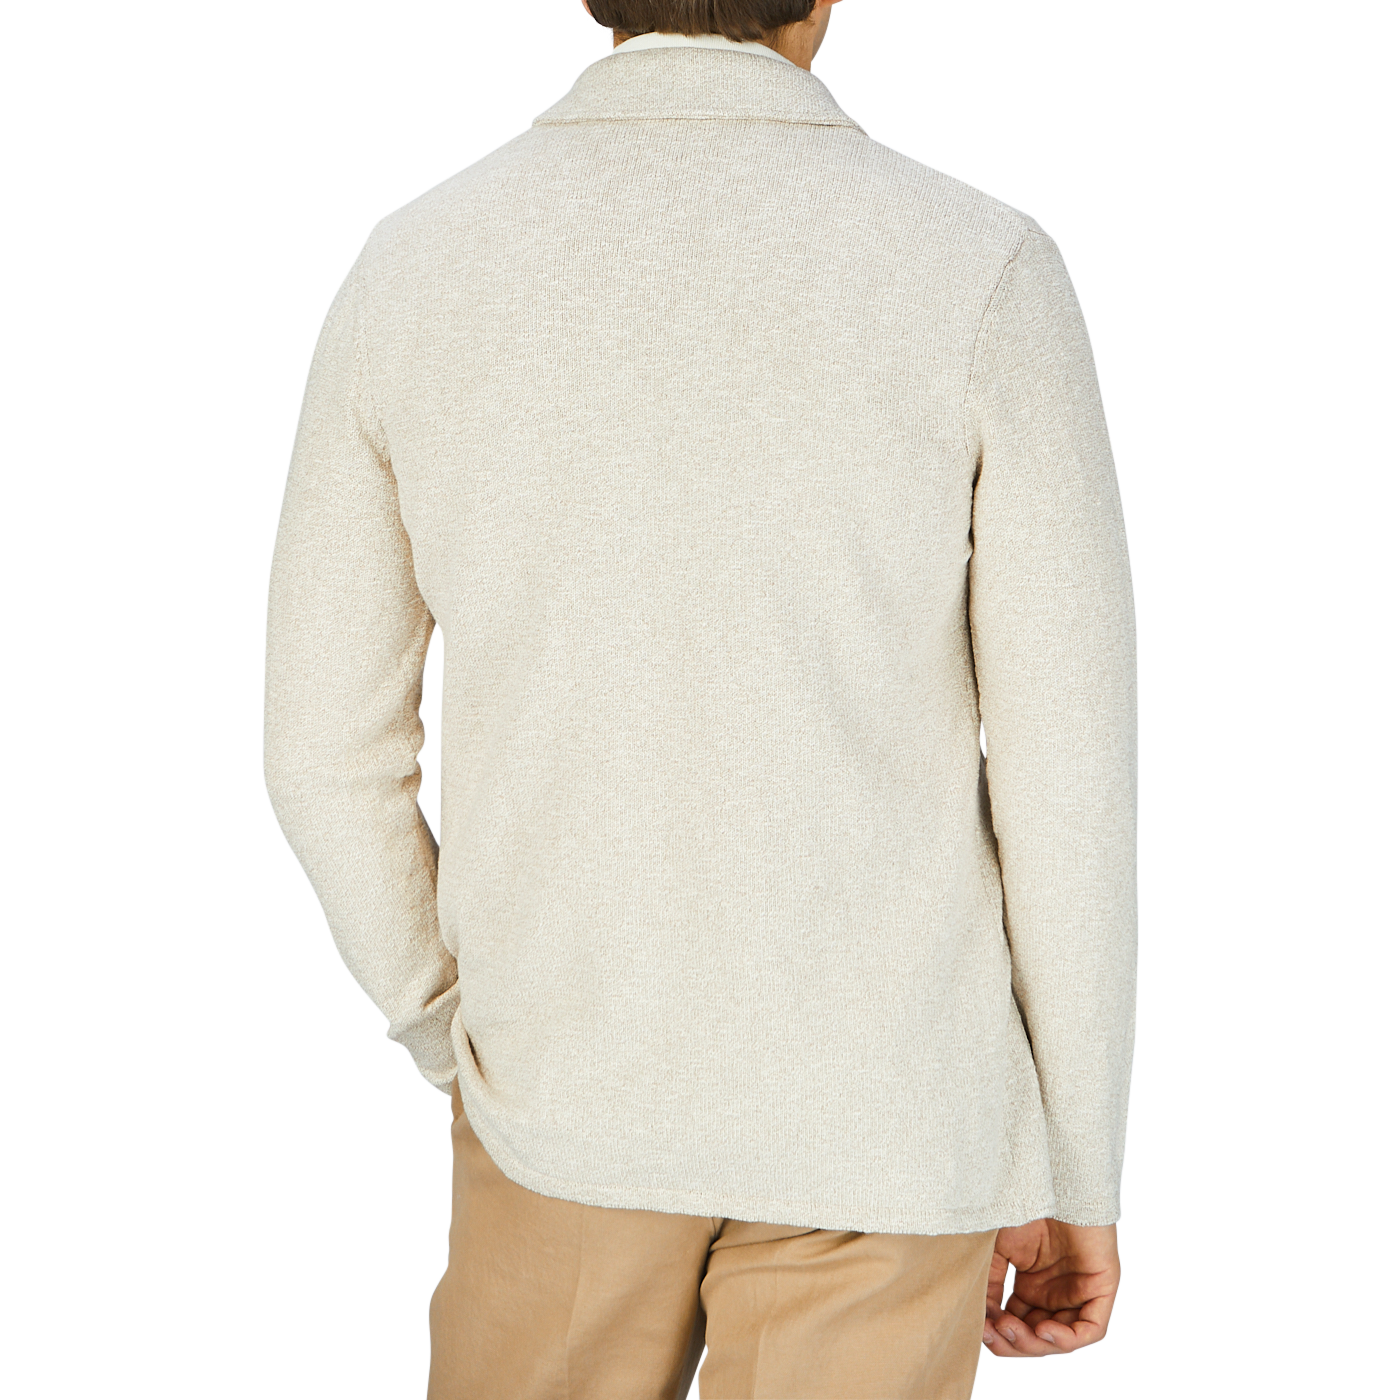 The back view of a man wearing a Maurizio Baldassari Light Brown Cotton Mouline Swacket and tan pants.